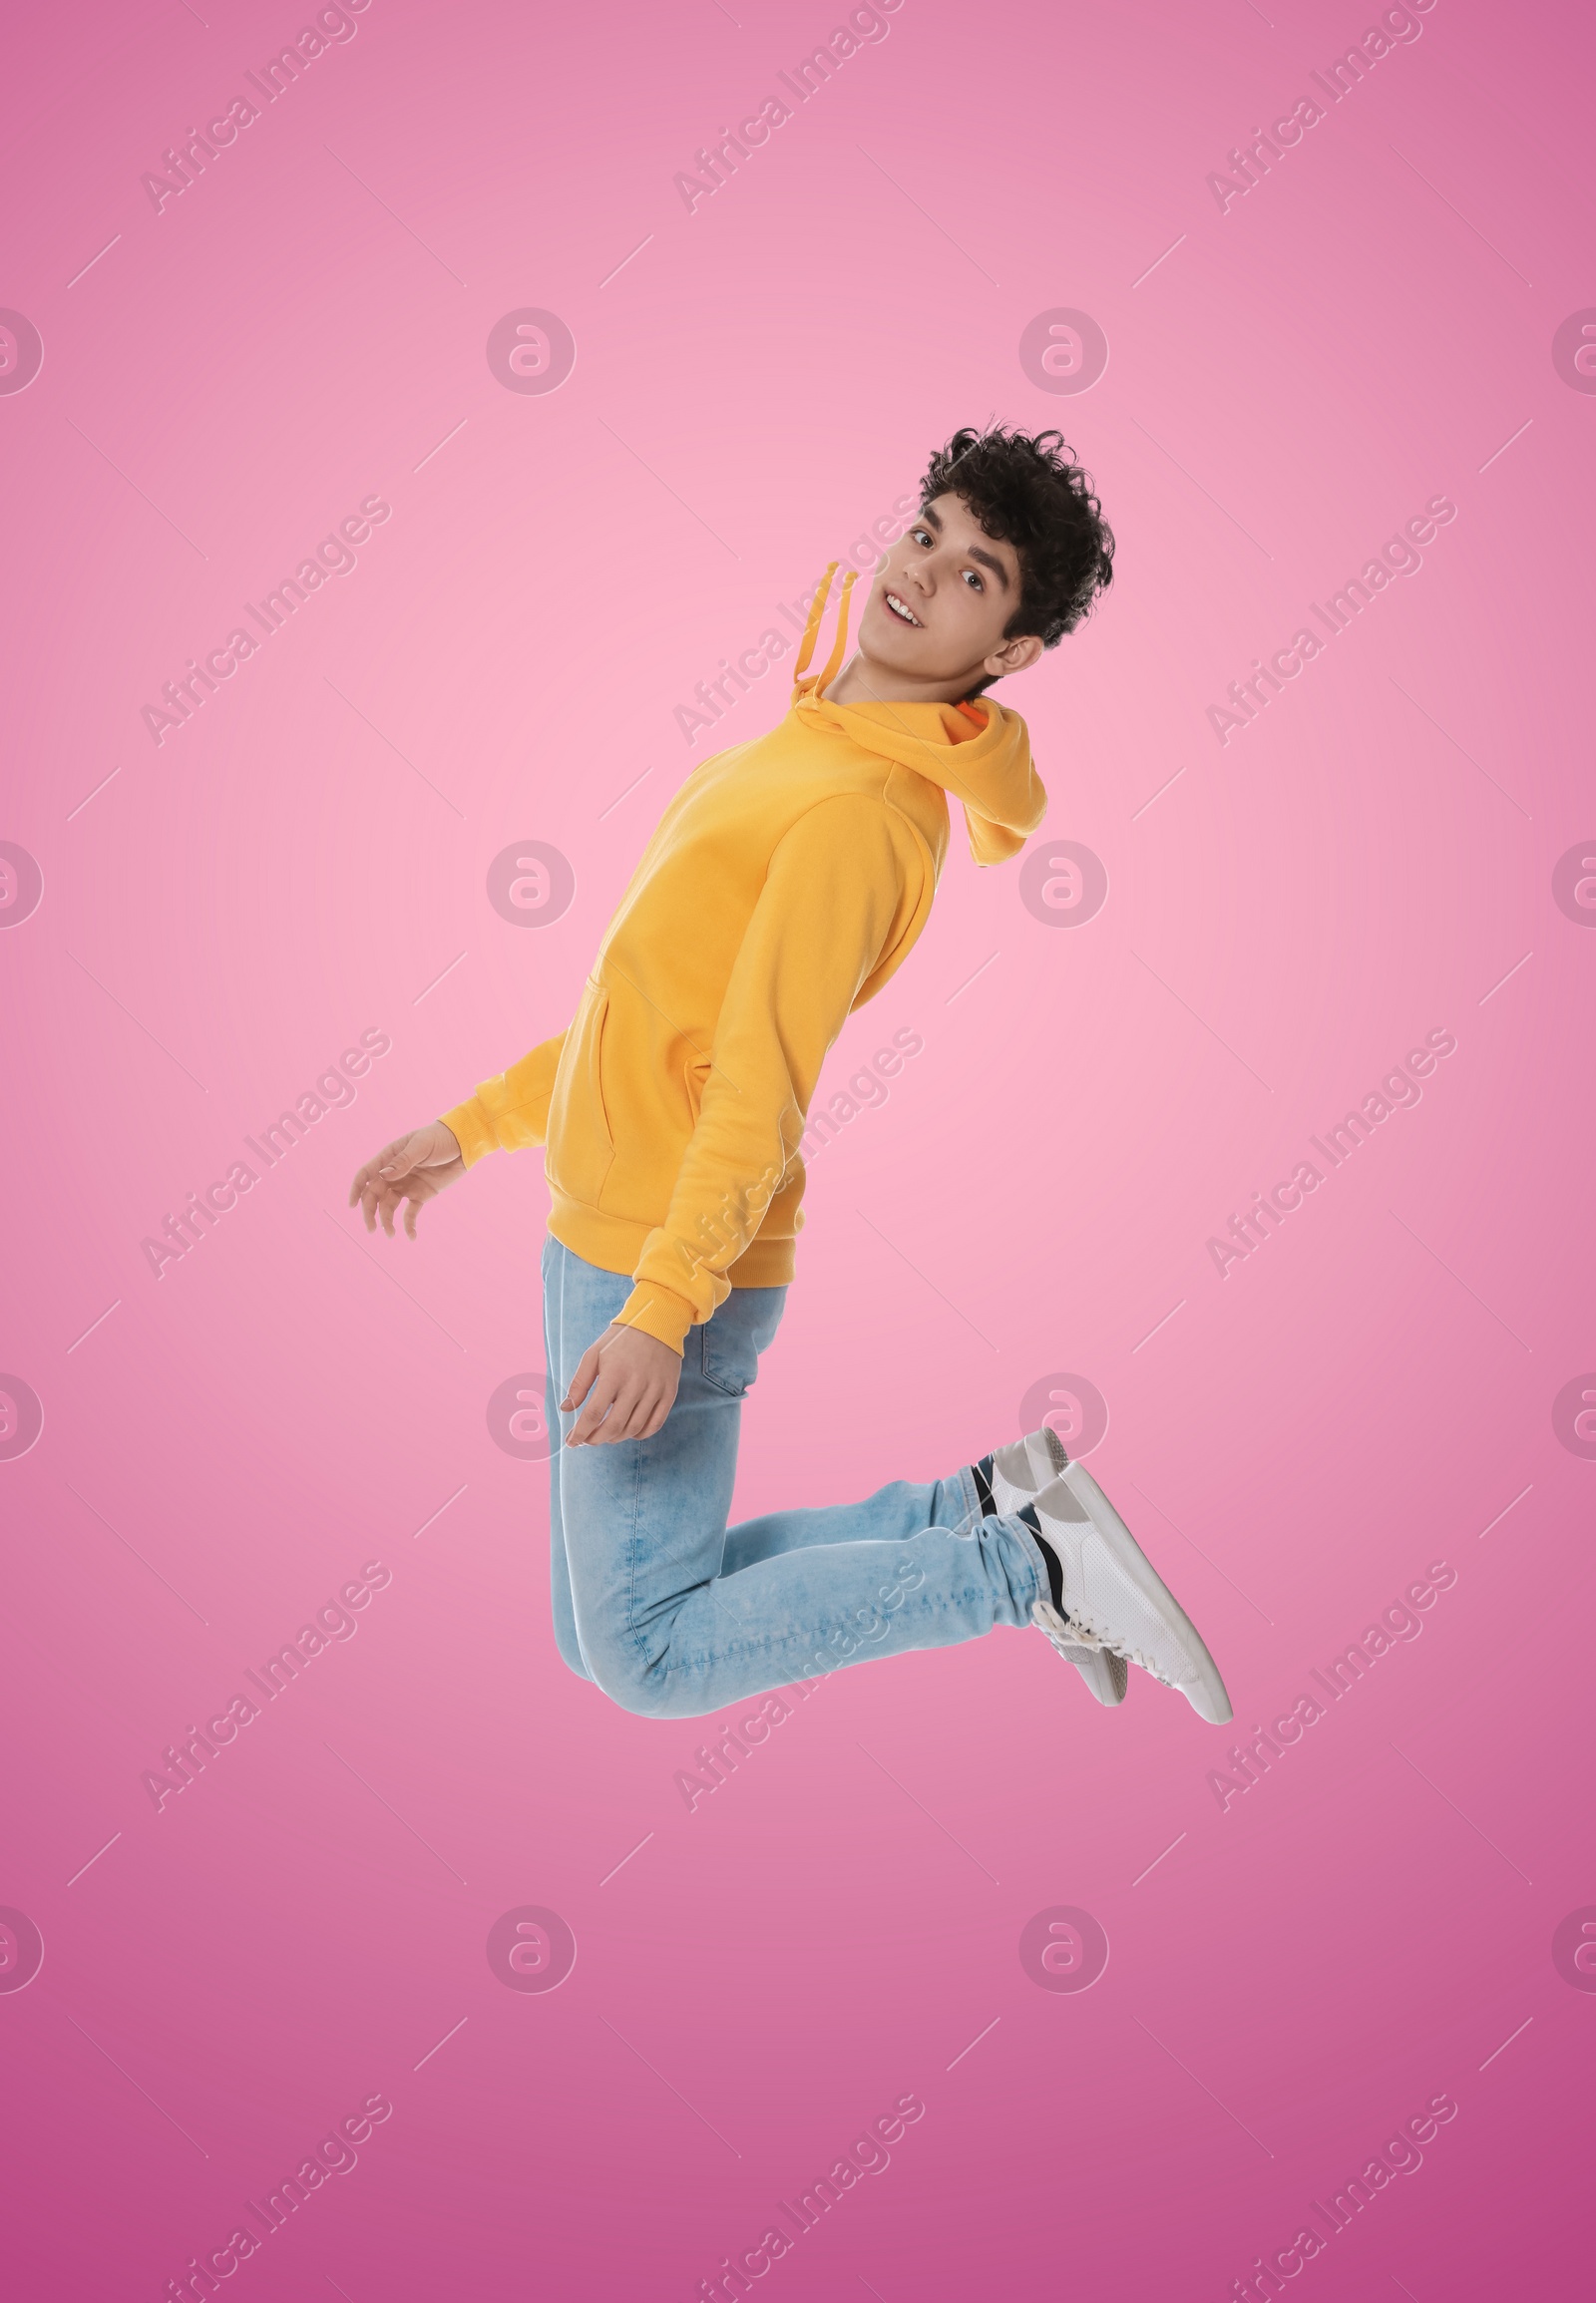 Image of Teenage boy jumping on pink background, full length portrait